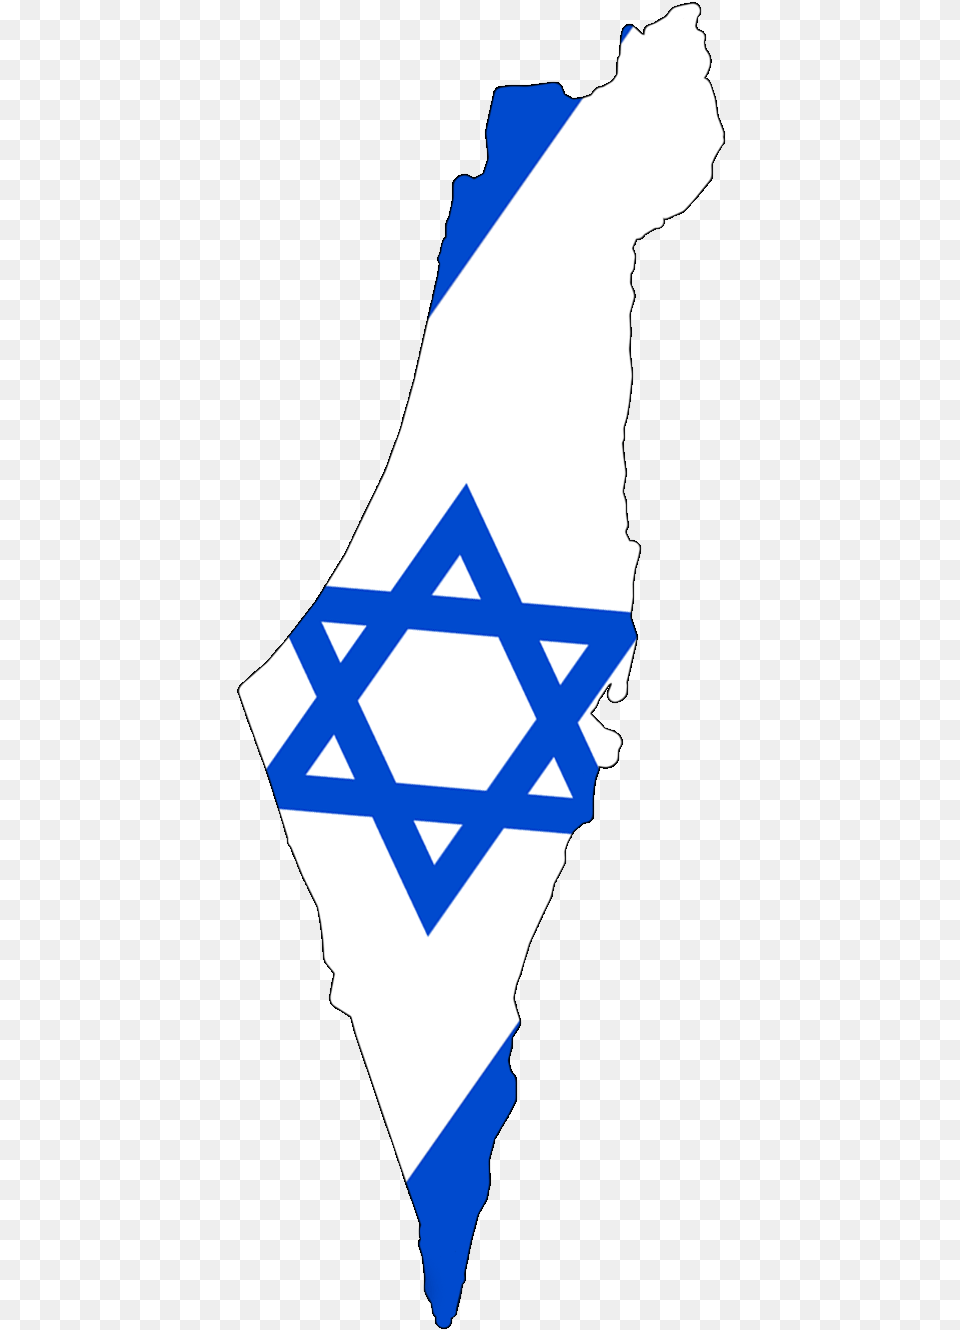 Flag Of Israel Star Of David National Flag Jewish People Jew Christians And Muslims, Adult, Bride, Female, Person Png Image